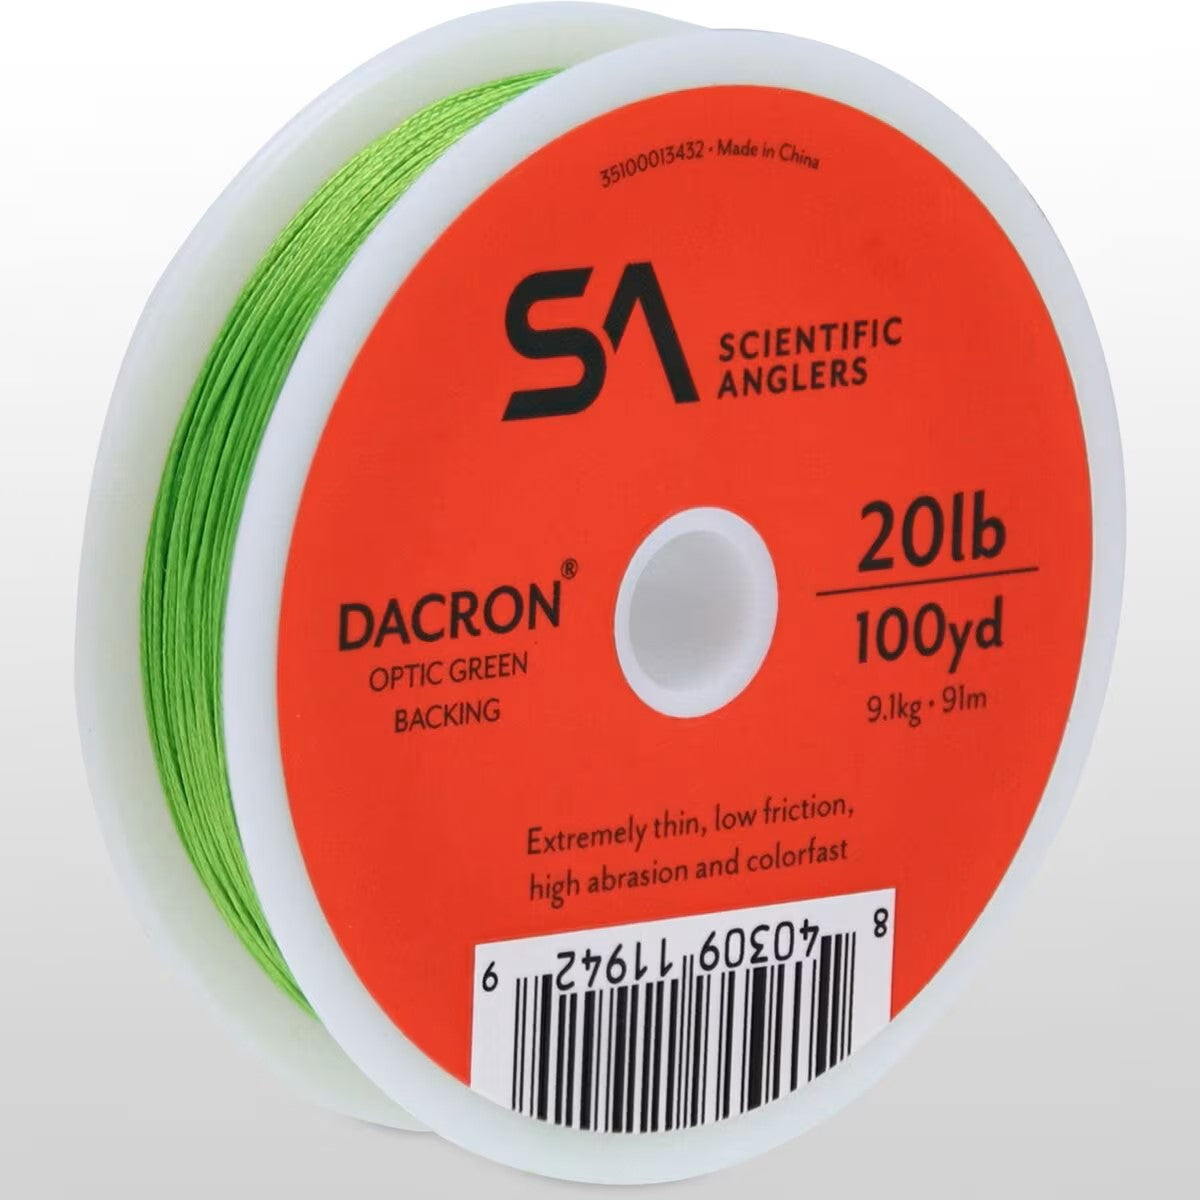 Scientific Anglers Dacron Backing in Optic Green 30lb - 250yds